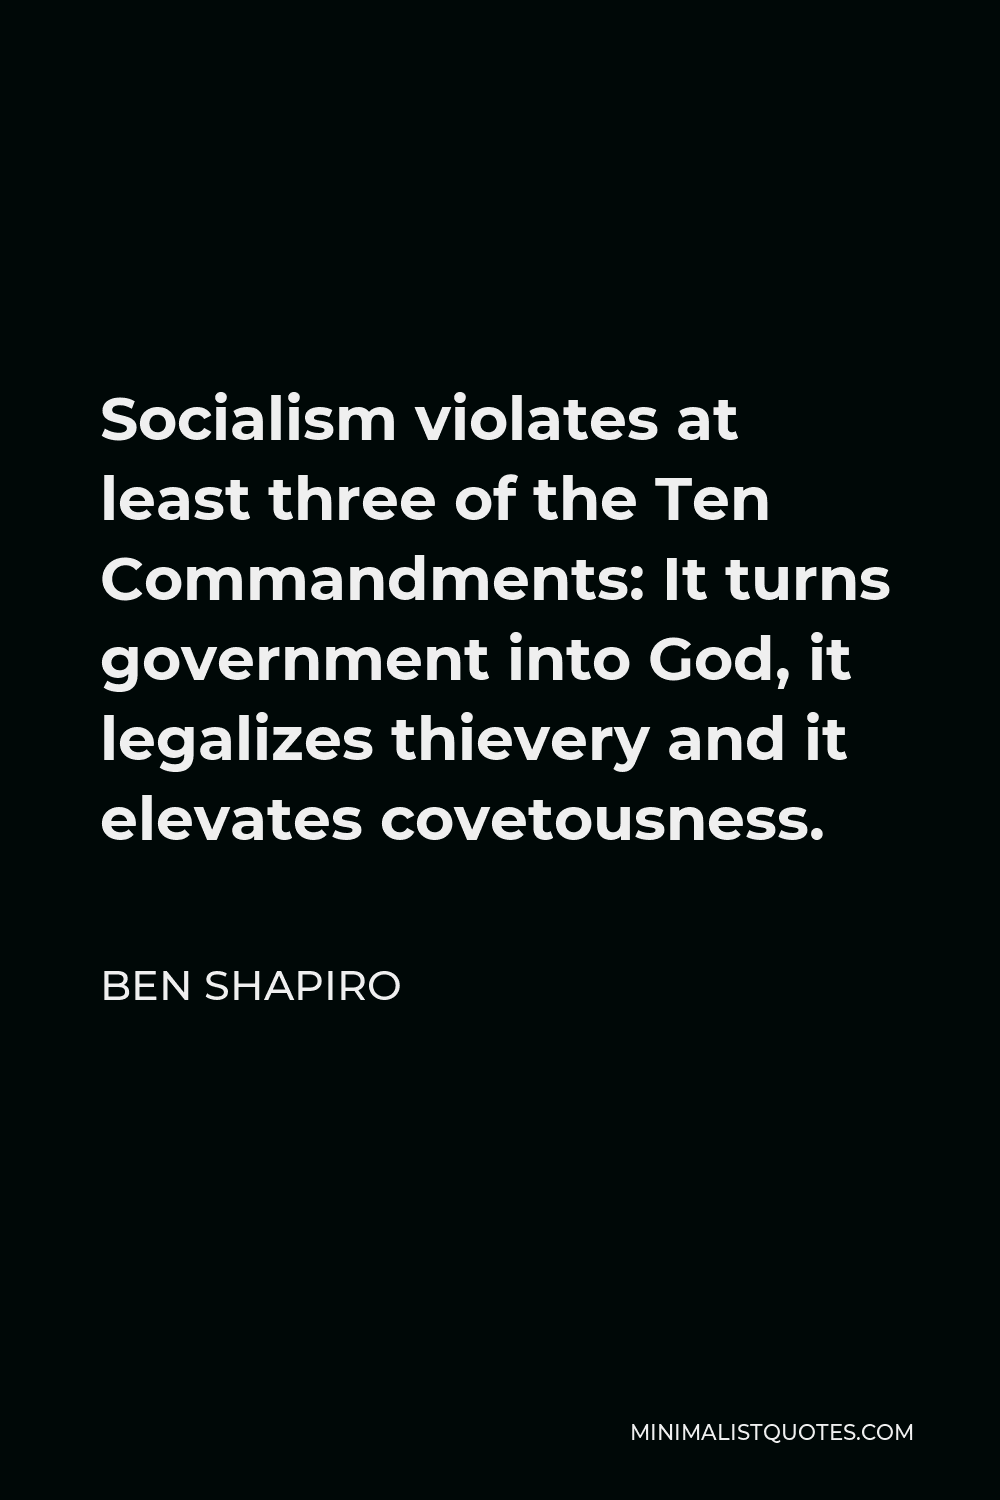 Ben Shapiro Quote - Socialism violates at least three of the Ten Commandments: It turns government into God, it legalizes thievery and it elevates covetousness.